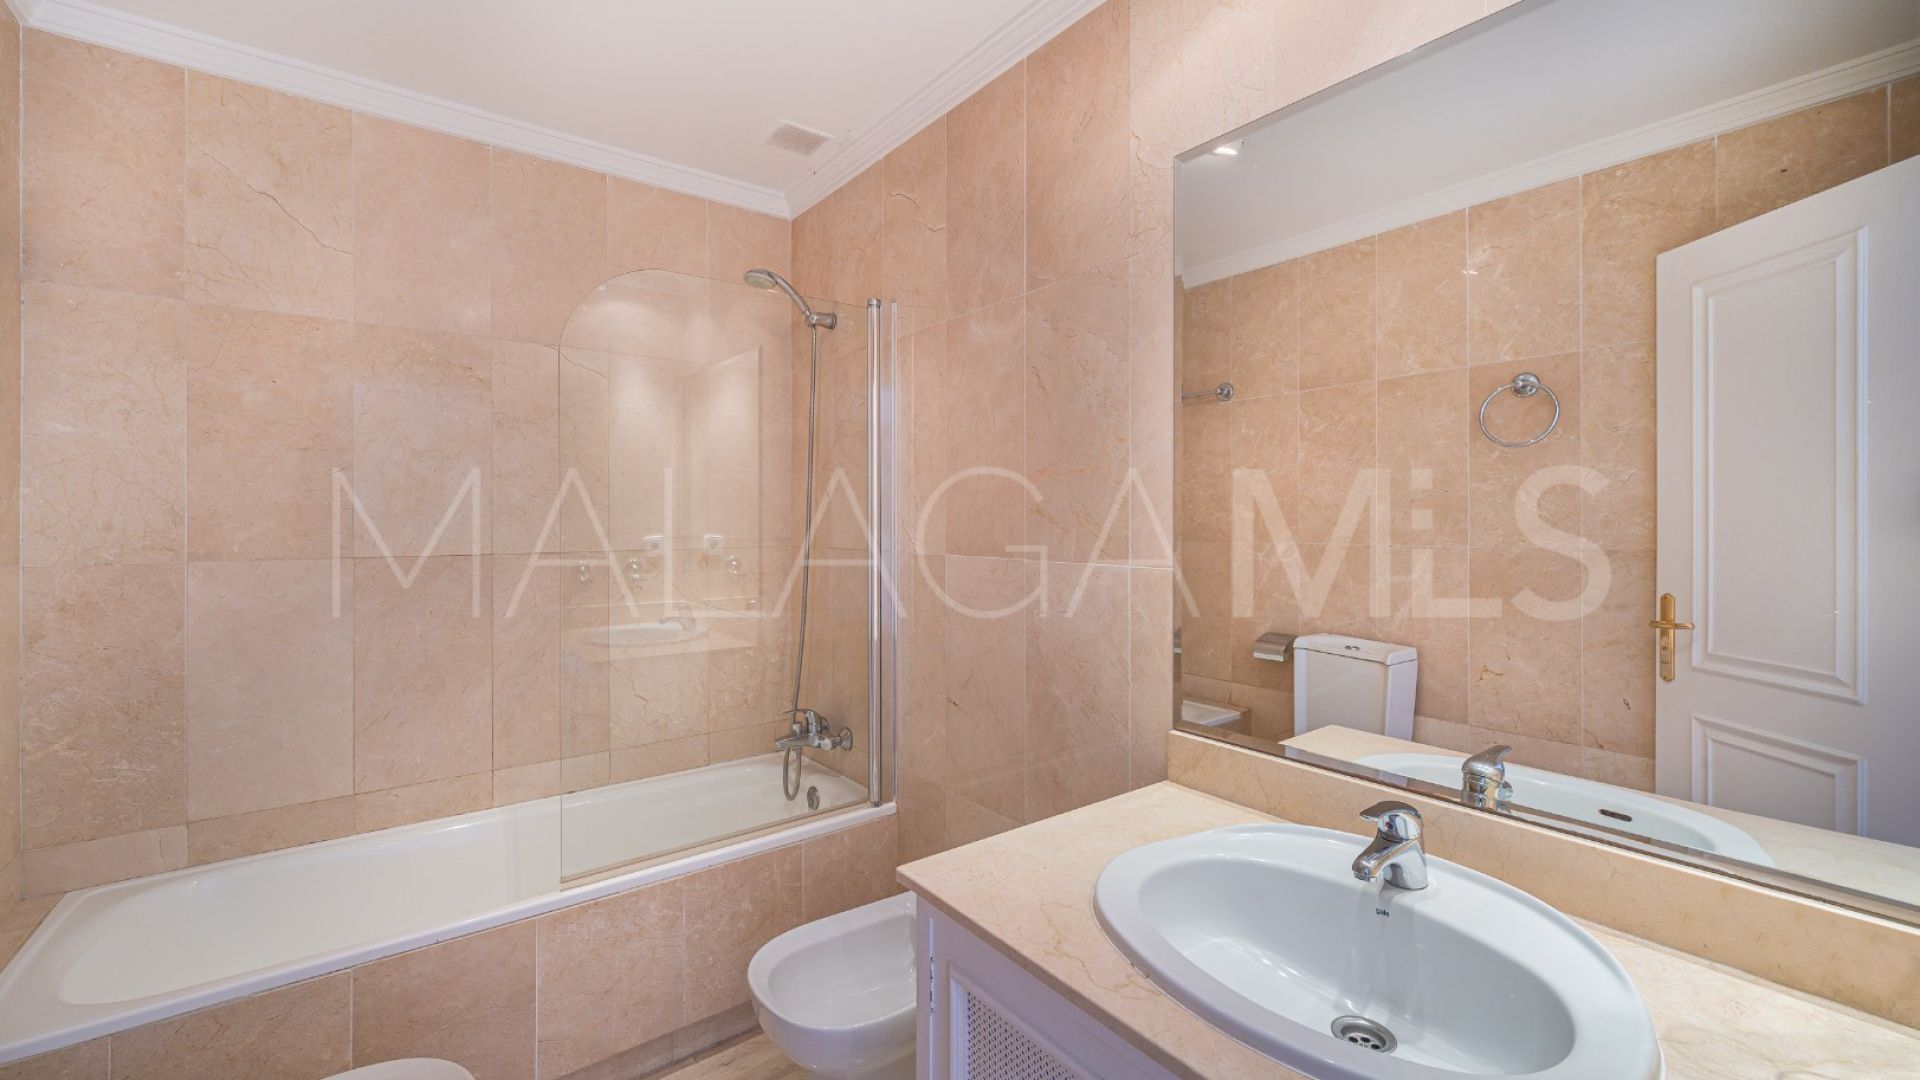 For sale 2 bedrooms duplex penthouse in Aloha Gardens